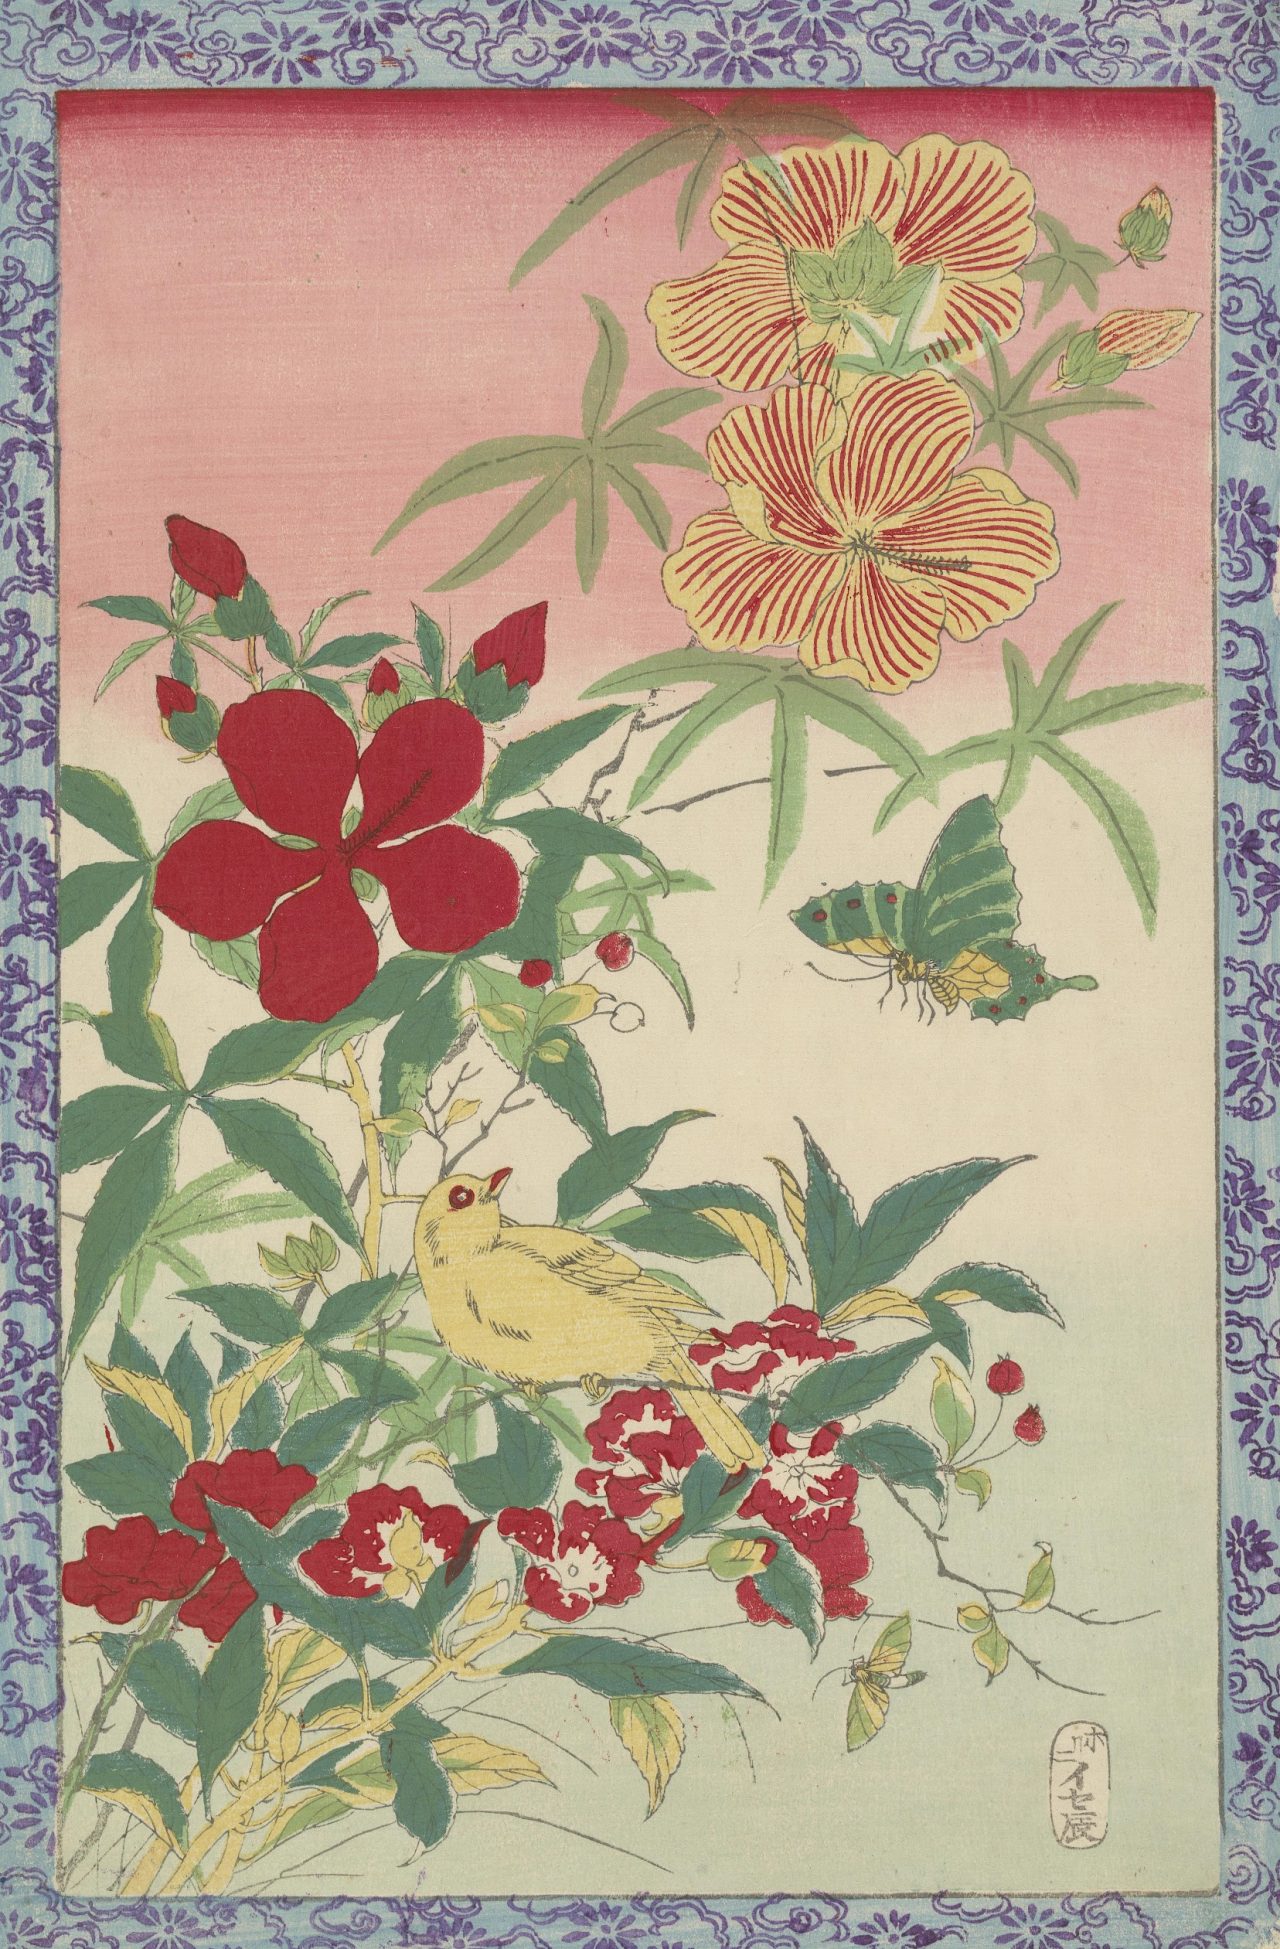 How Vincent van Gogh’s Collection of Japanese Prints Inspired His 'Art...